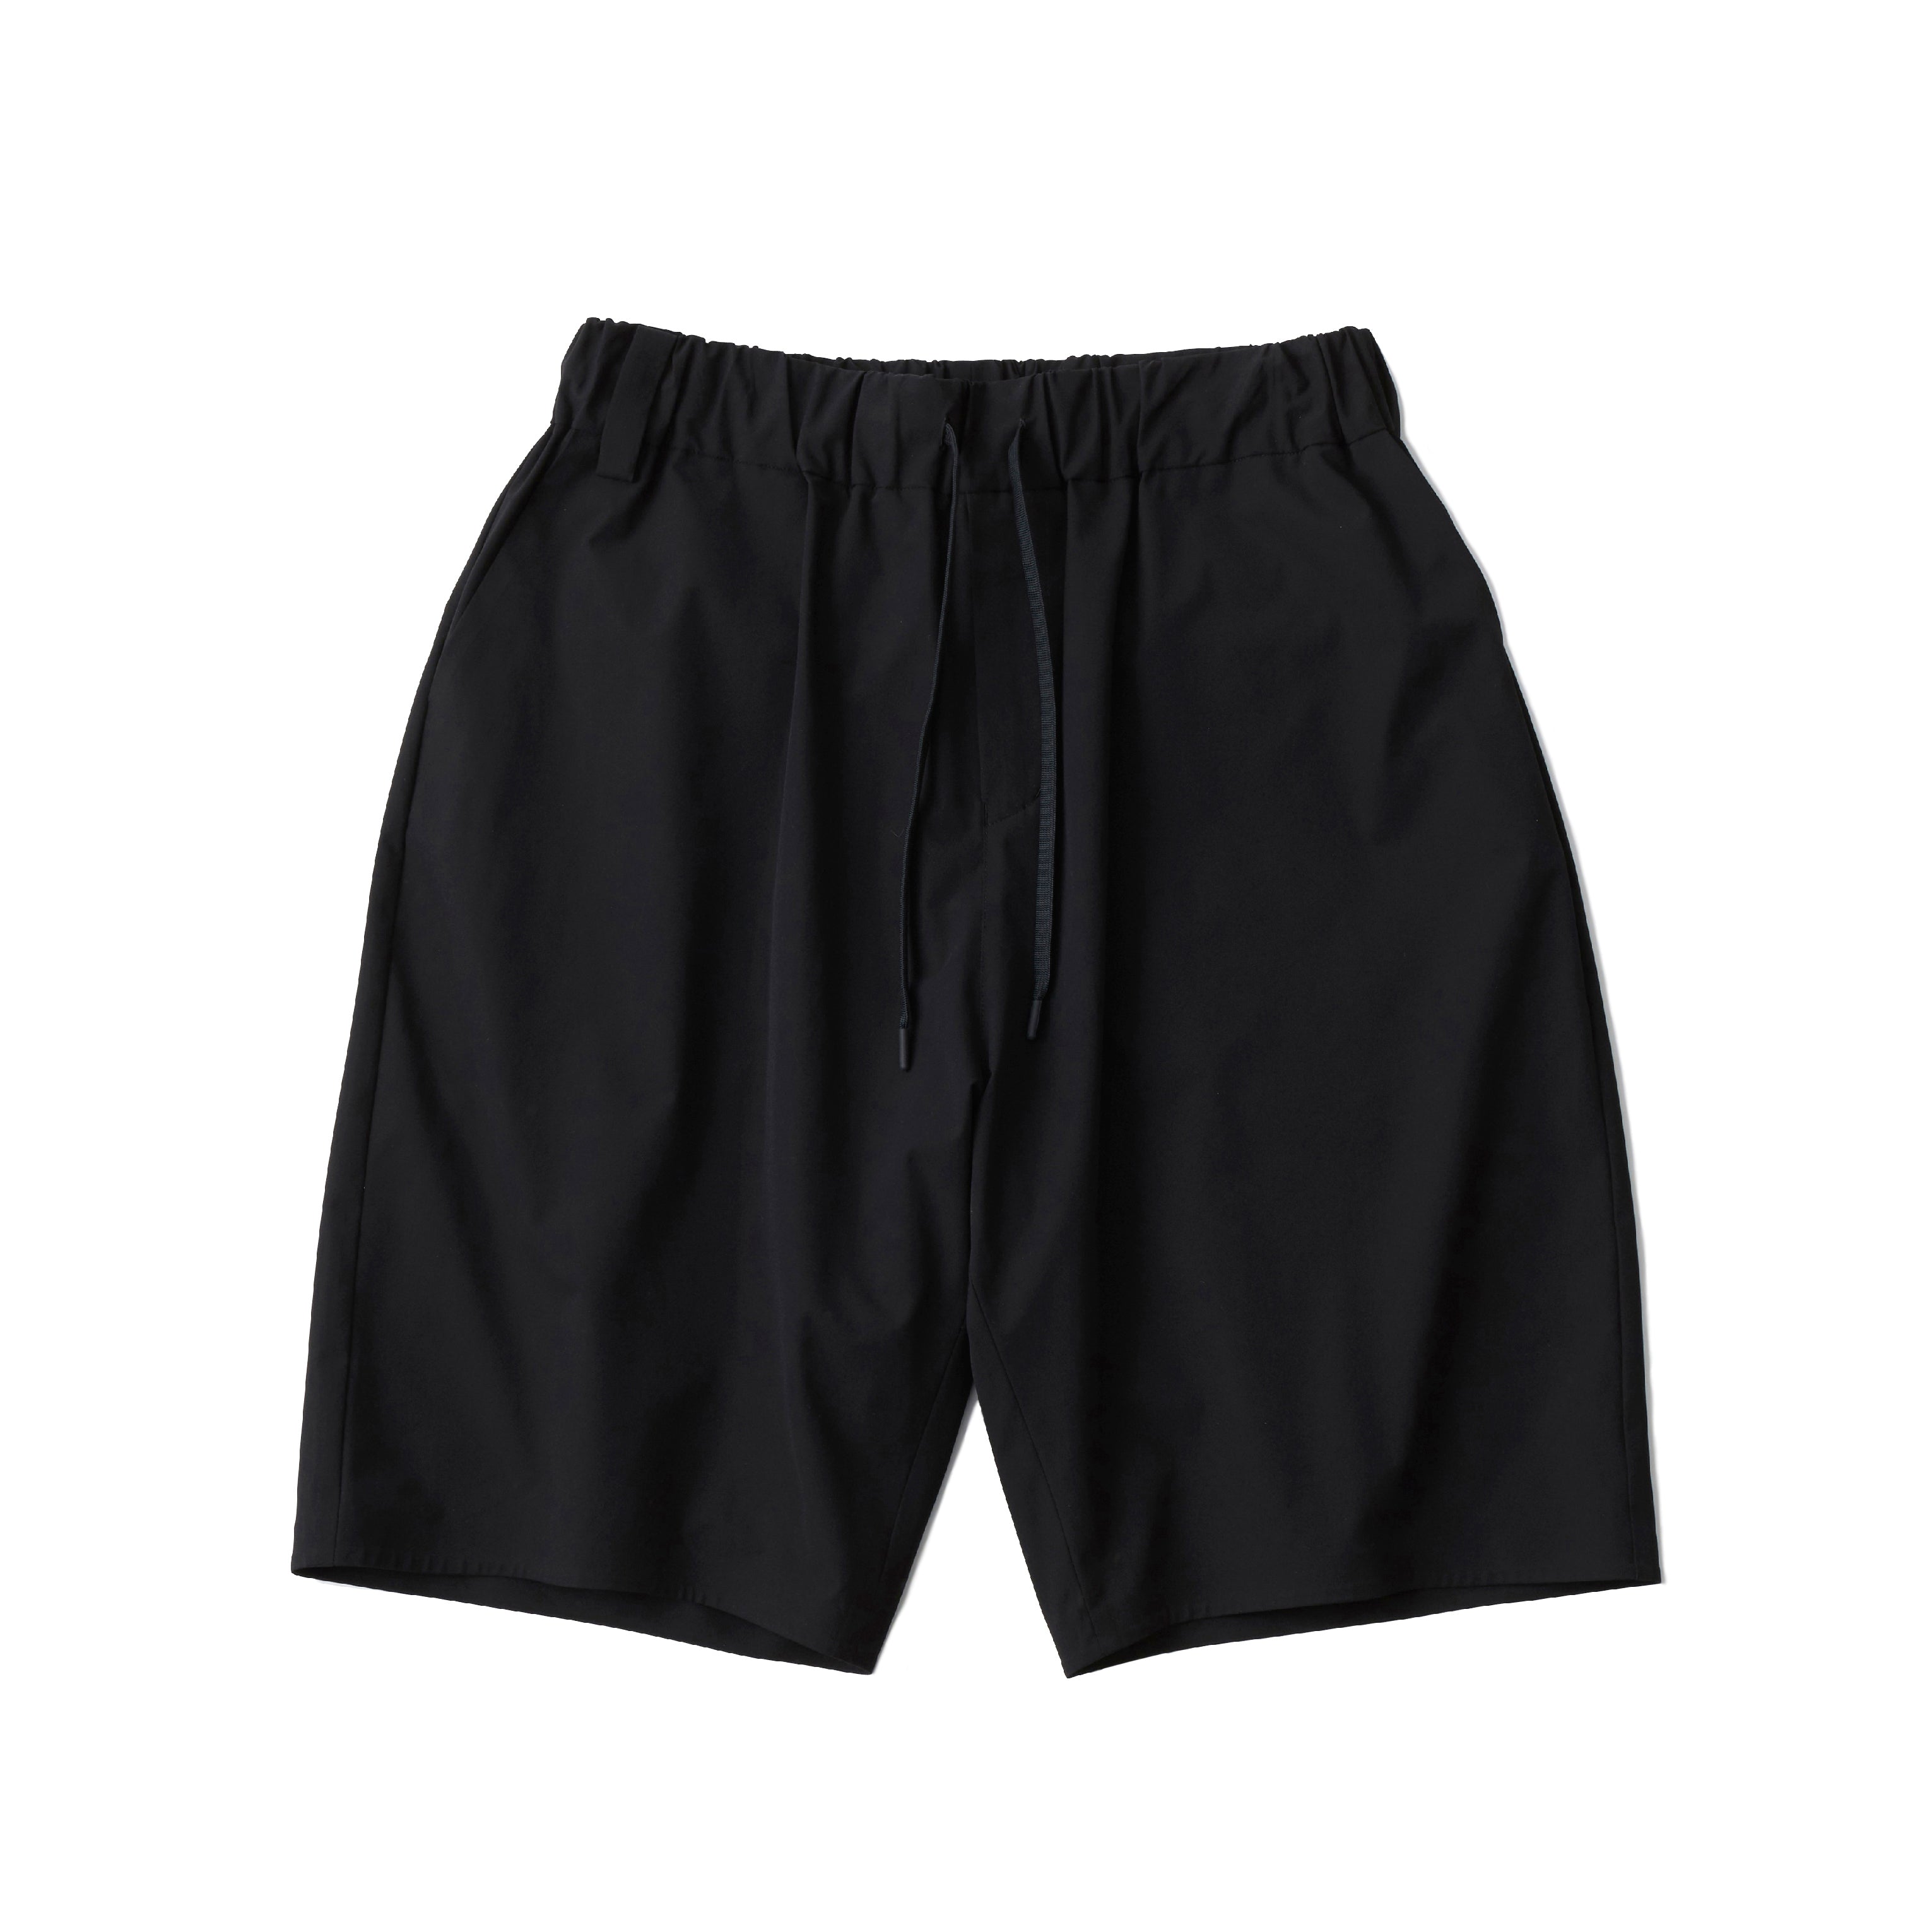 SAROUEL SHORT PANTS – White Mountaineering OFFICIAL WEB SITE.